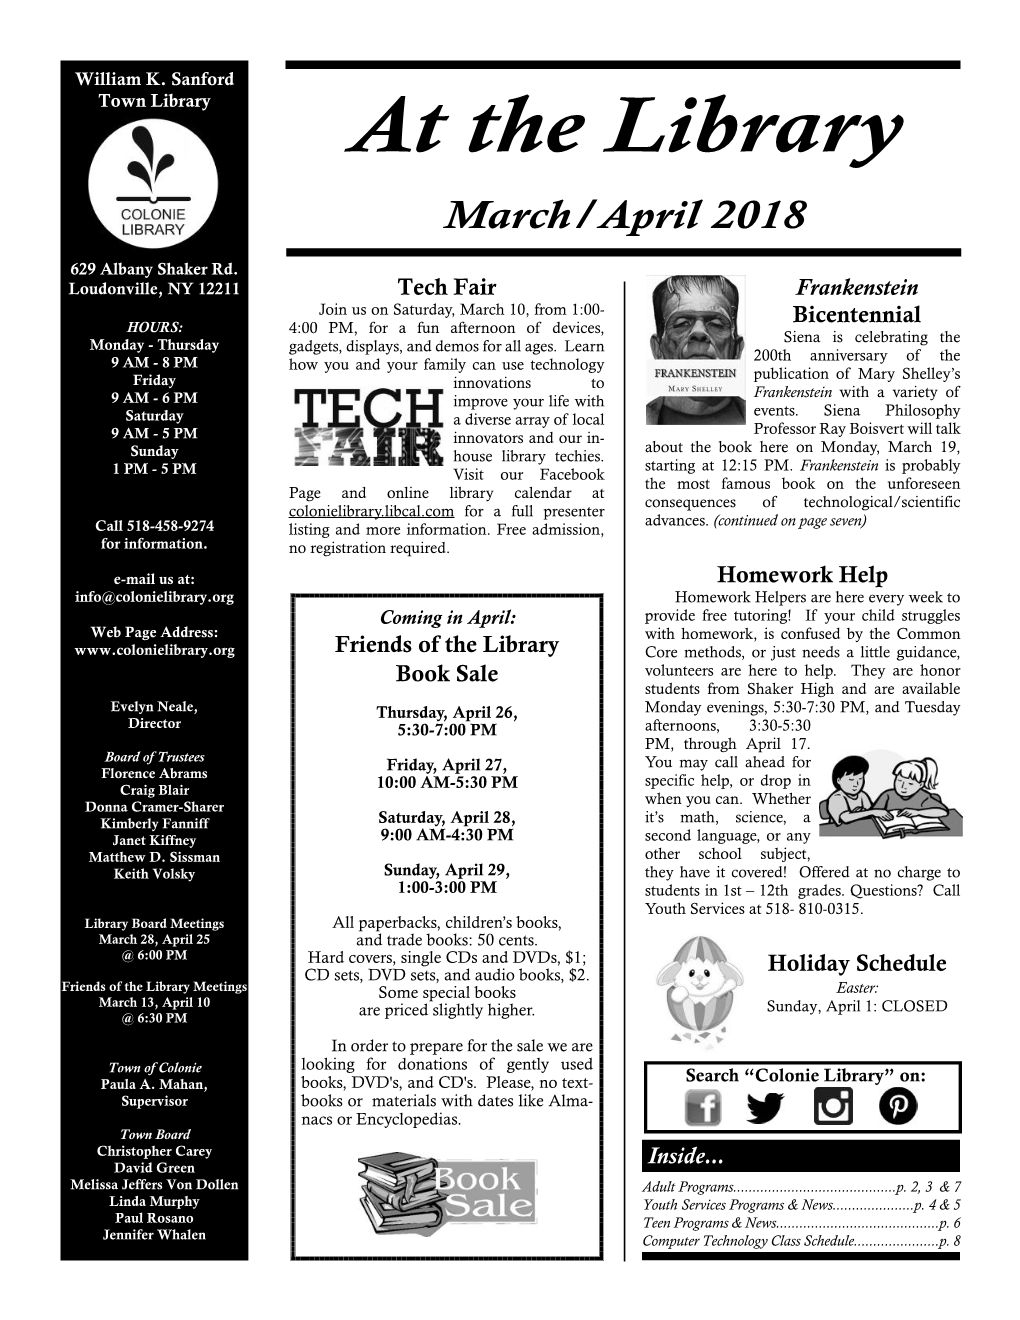 At the Library March/April 2018